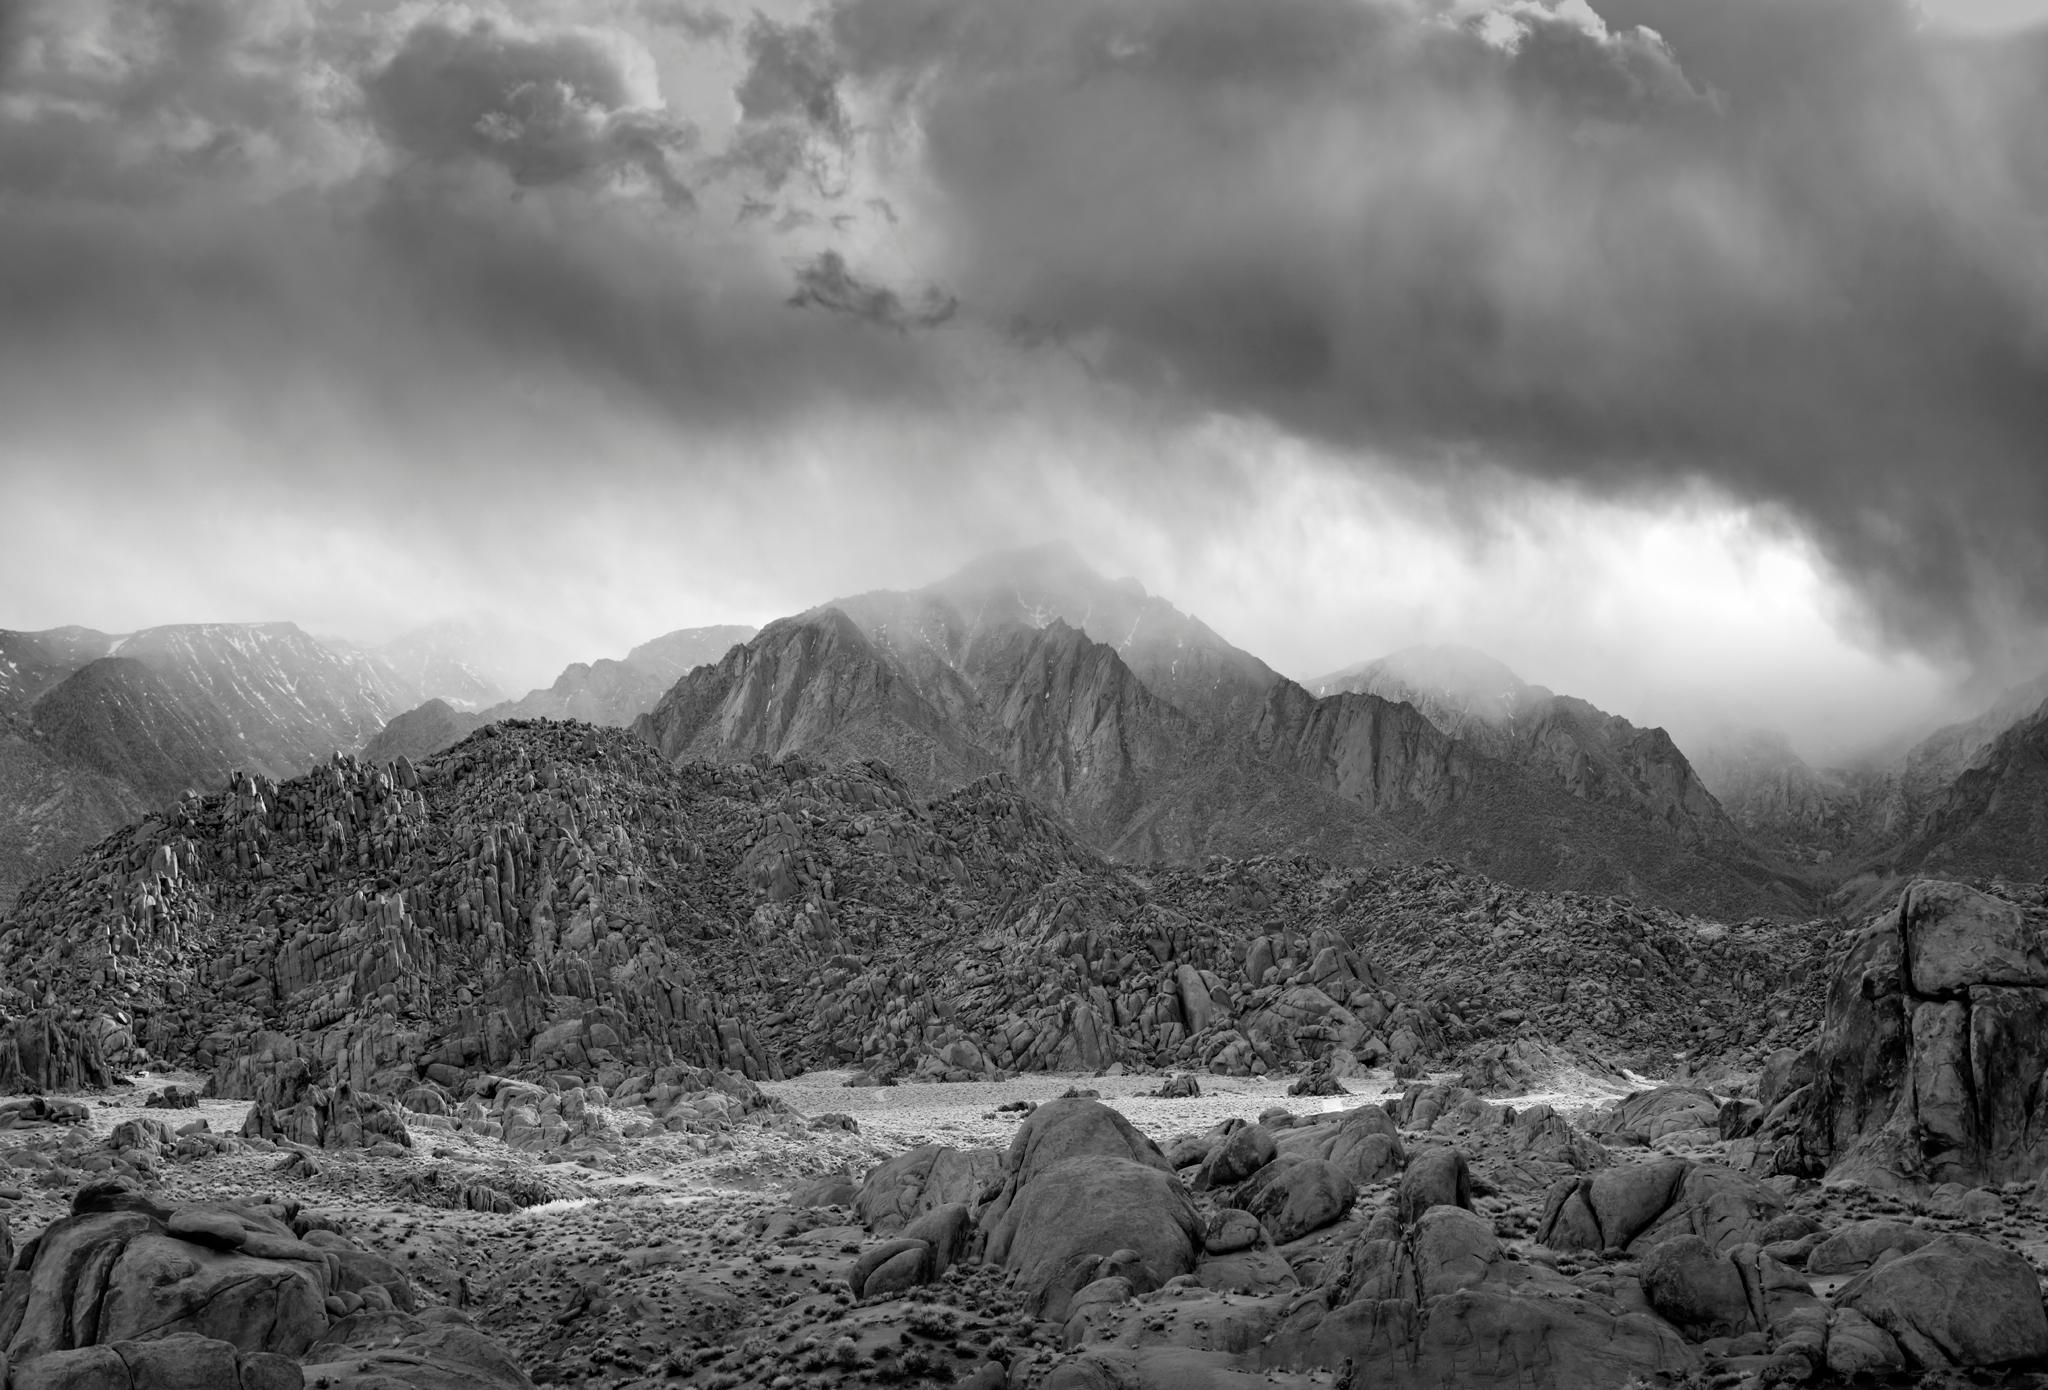 Mitch Dobrowner Black and White Photograph - Storm over Sierra Nevada, limited edition photograph, signed, archival ink print